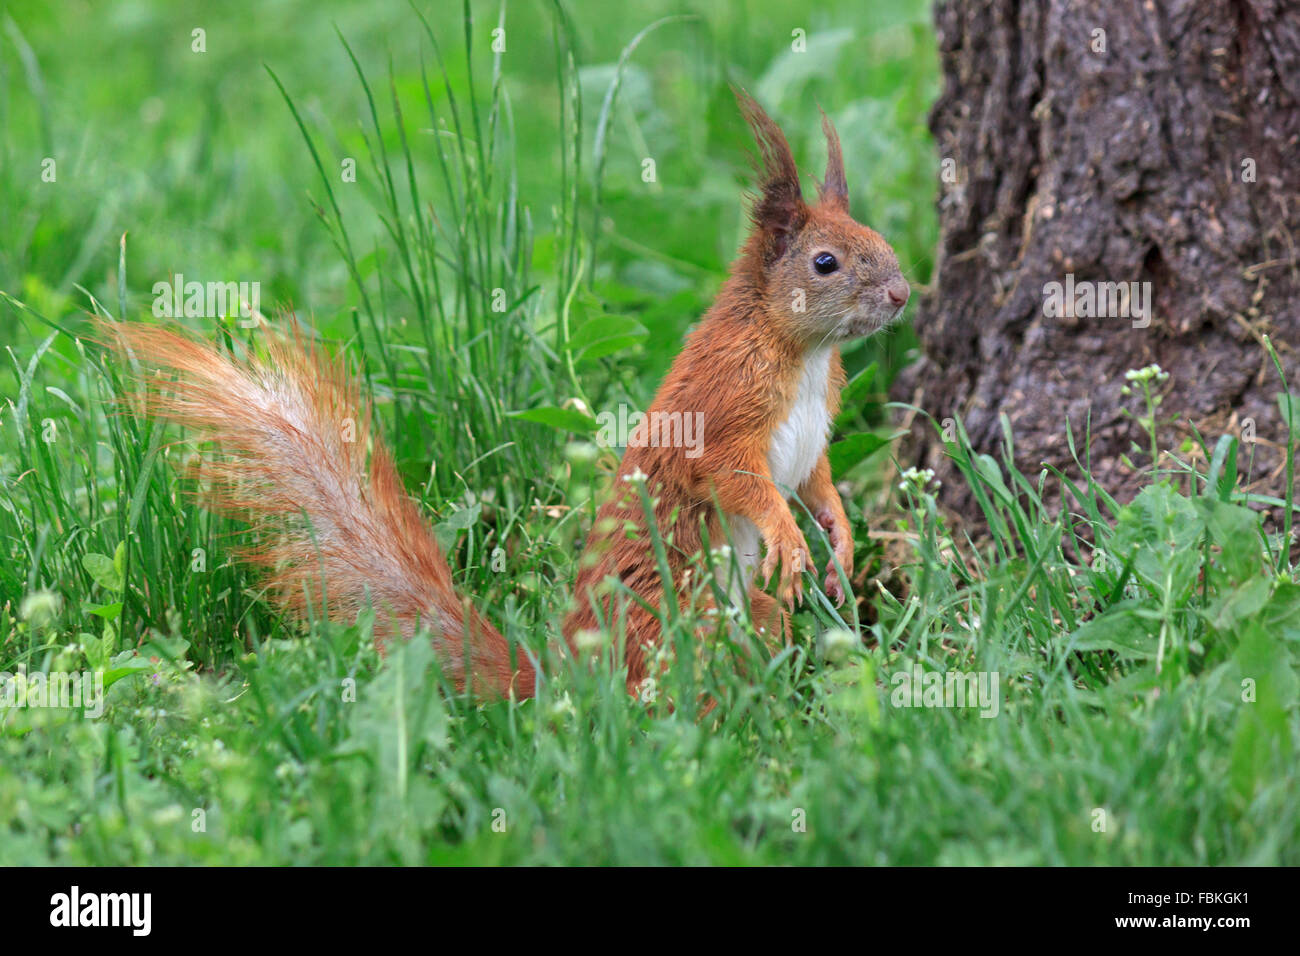 Close up of squirrel in Green grass Banque D'Images